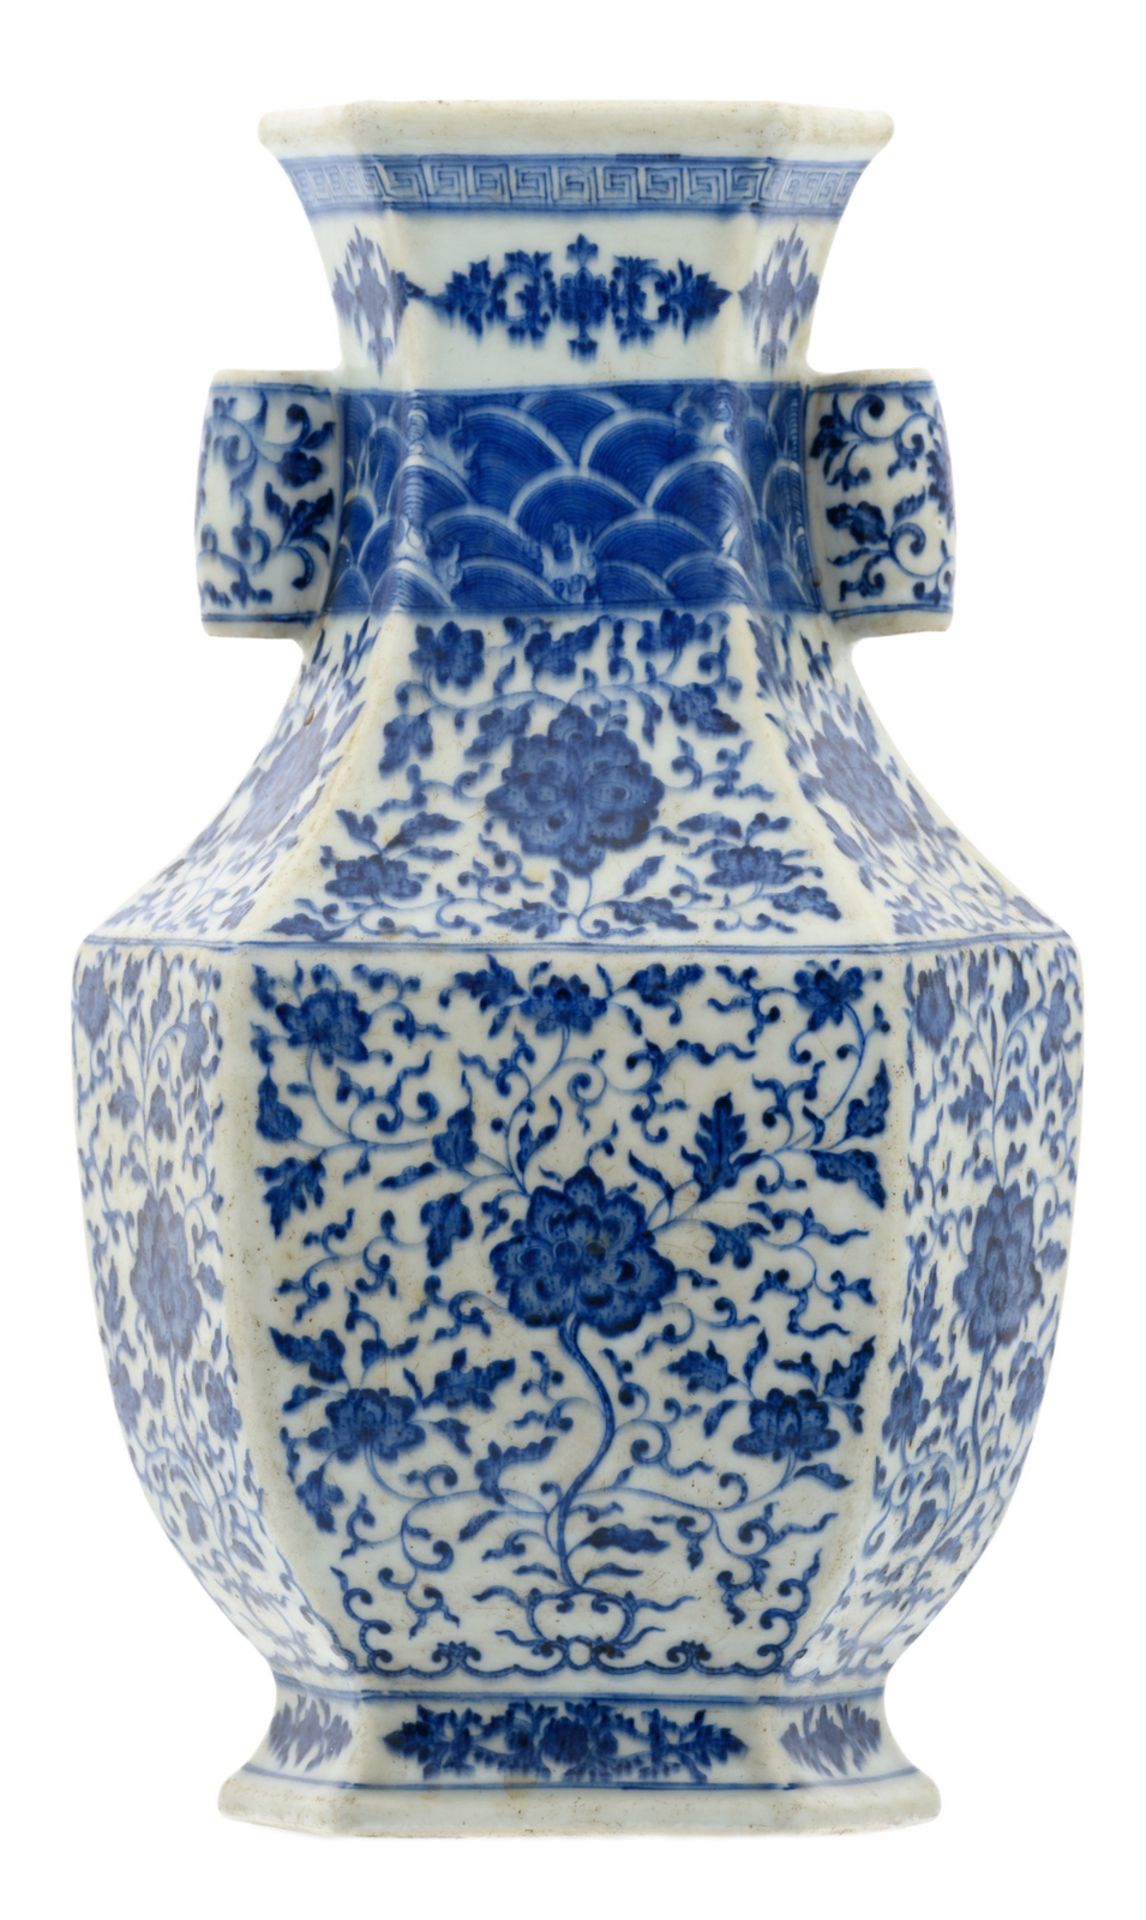 A fine Chinese blue and white floral decorated Hu vase with lotus flowers, Qianlong marked, 18/